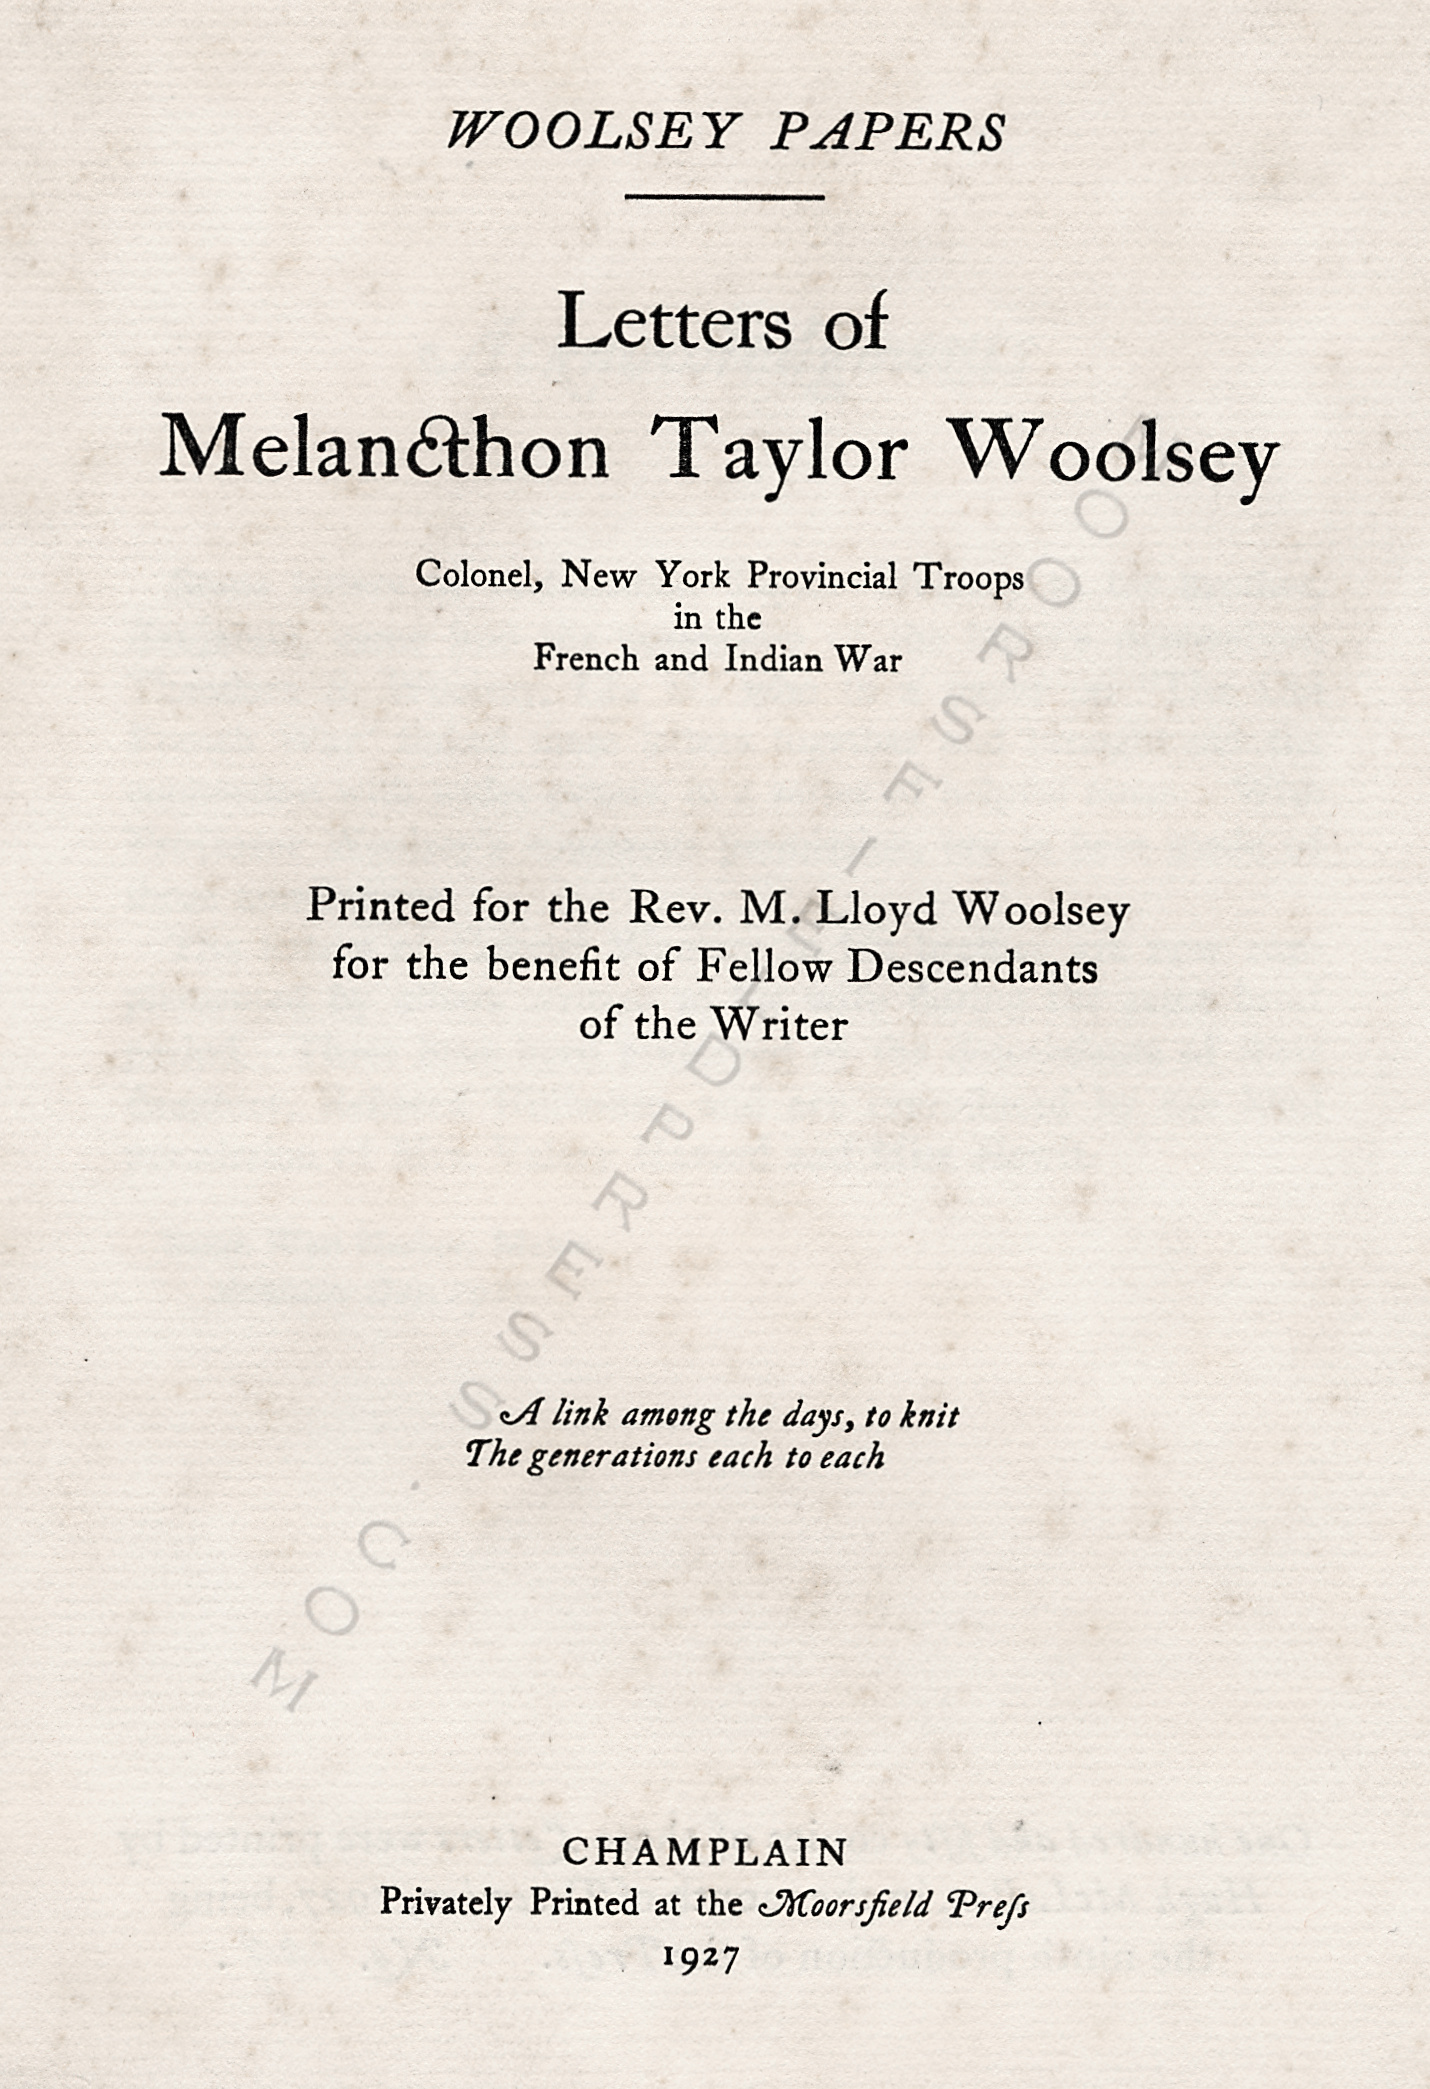 WOOLSEY
                      PAPERS-LETTERS OF MELANCTHON TAYLOR WOOLSEY 1758